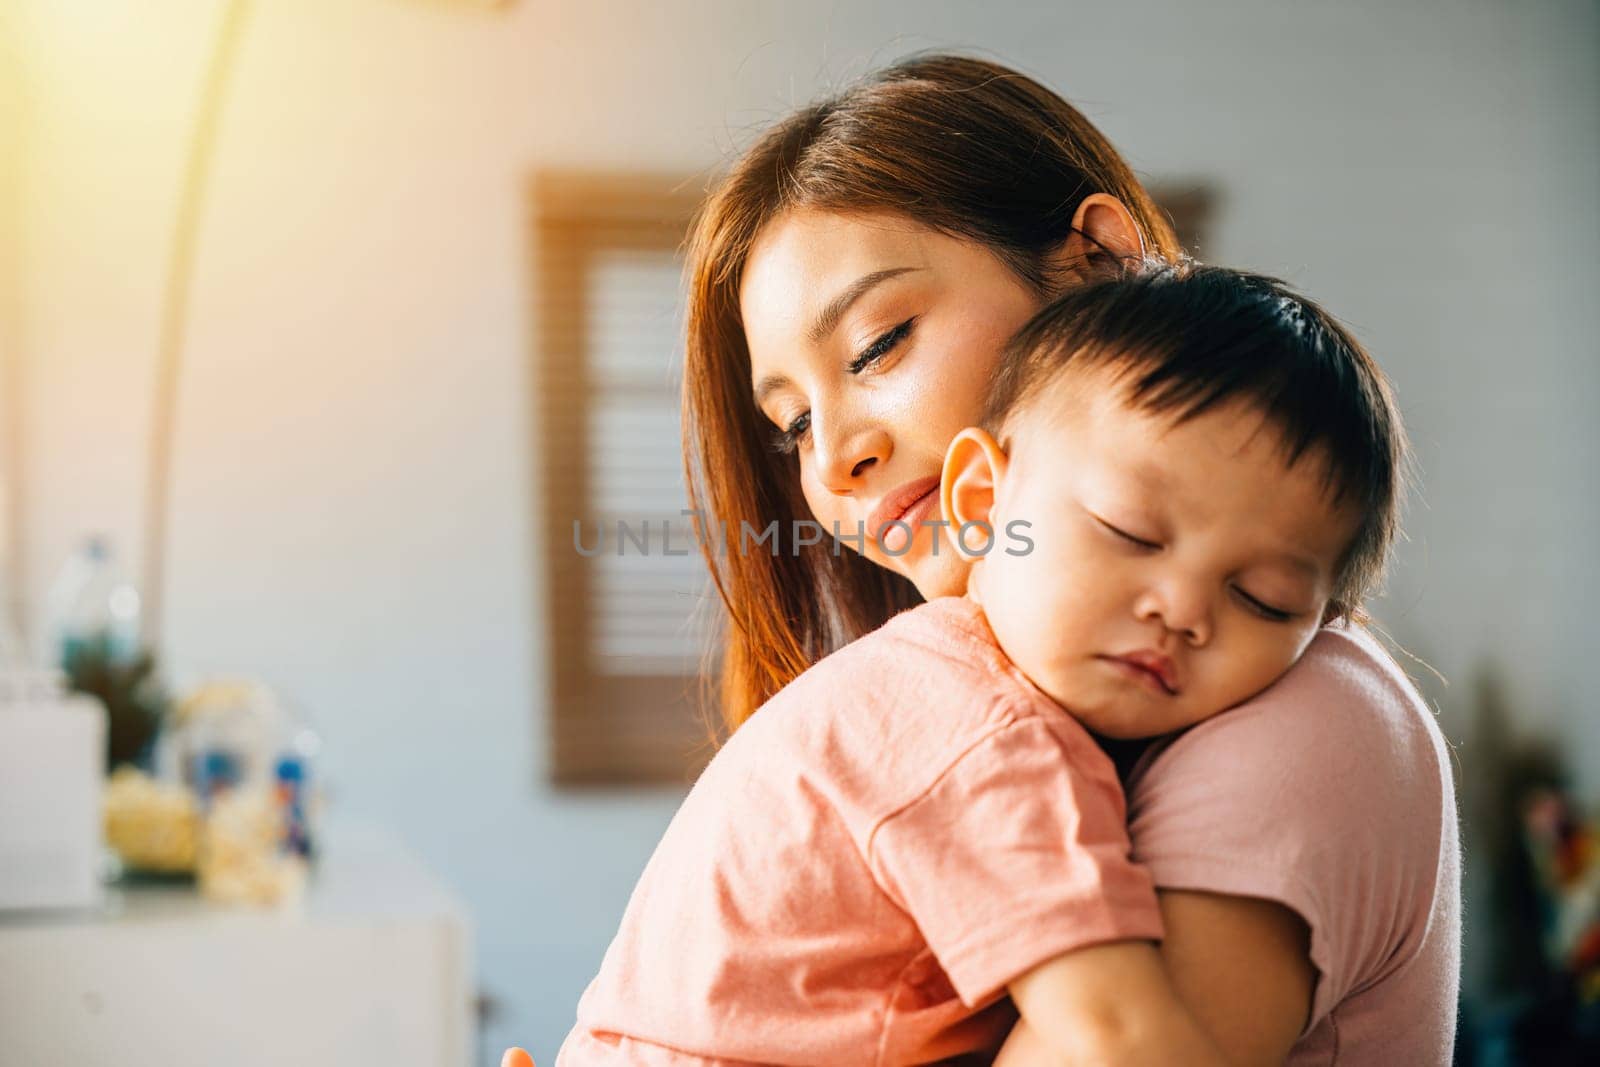 In the comfort of their home an Asian mom hugs her tiny slumbering infant celebrating a heartwarming family moment filled with joy bonding and the carefree moments of childhood.